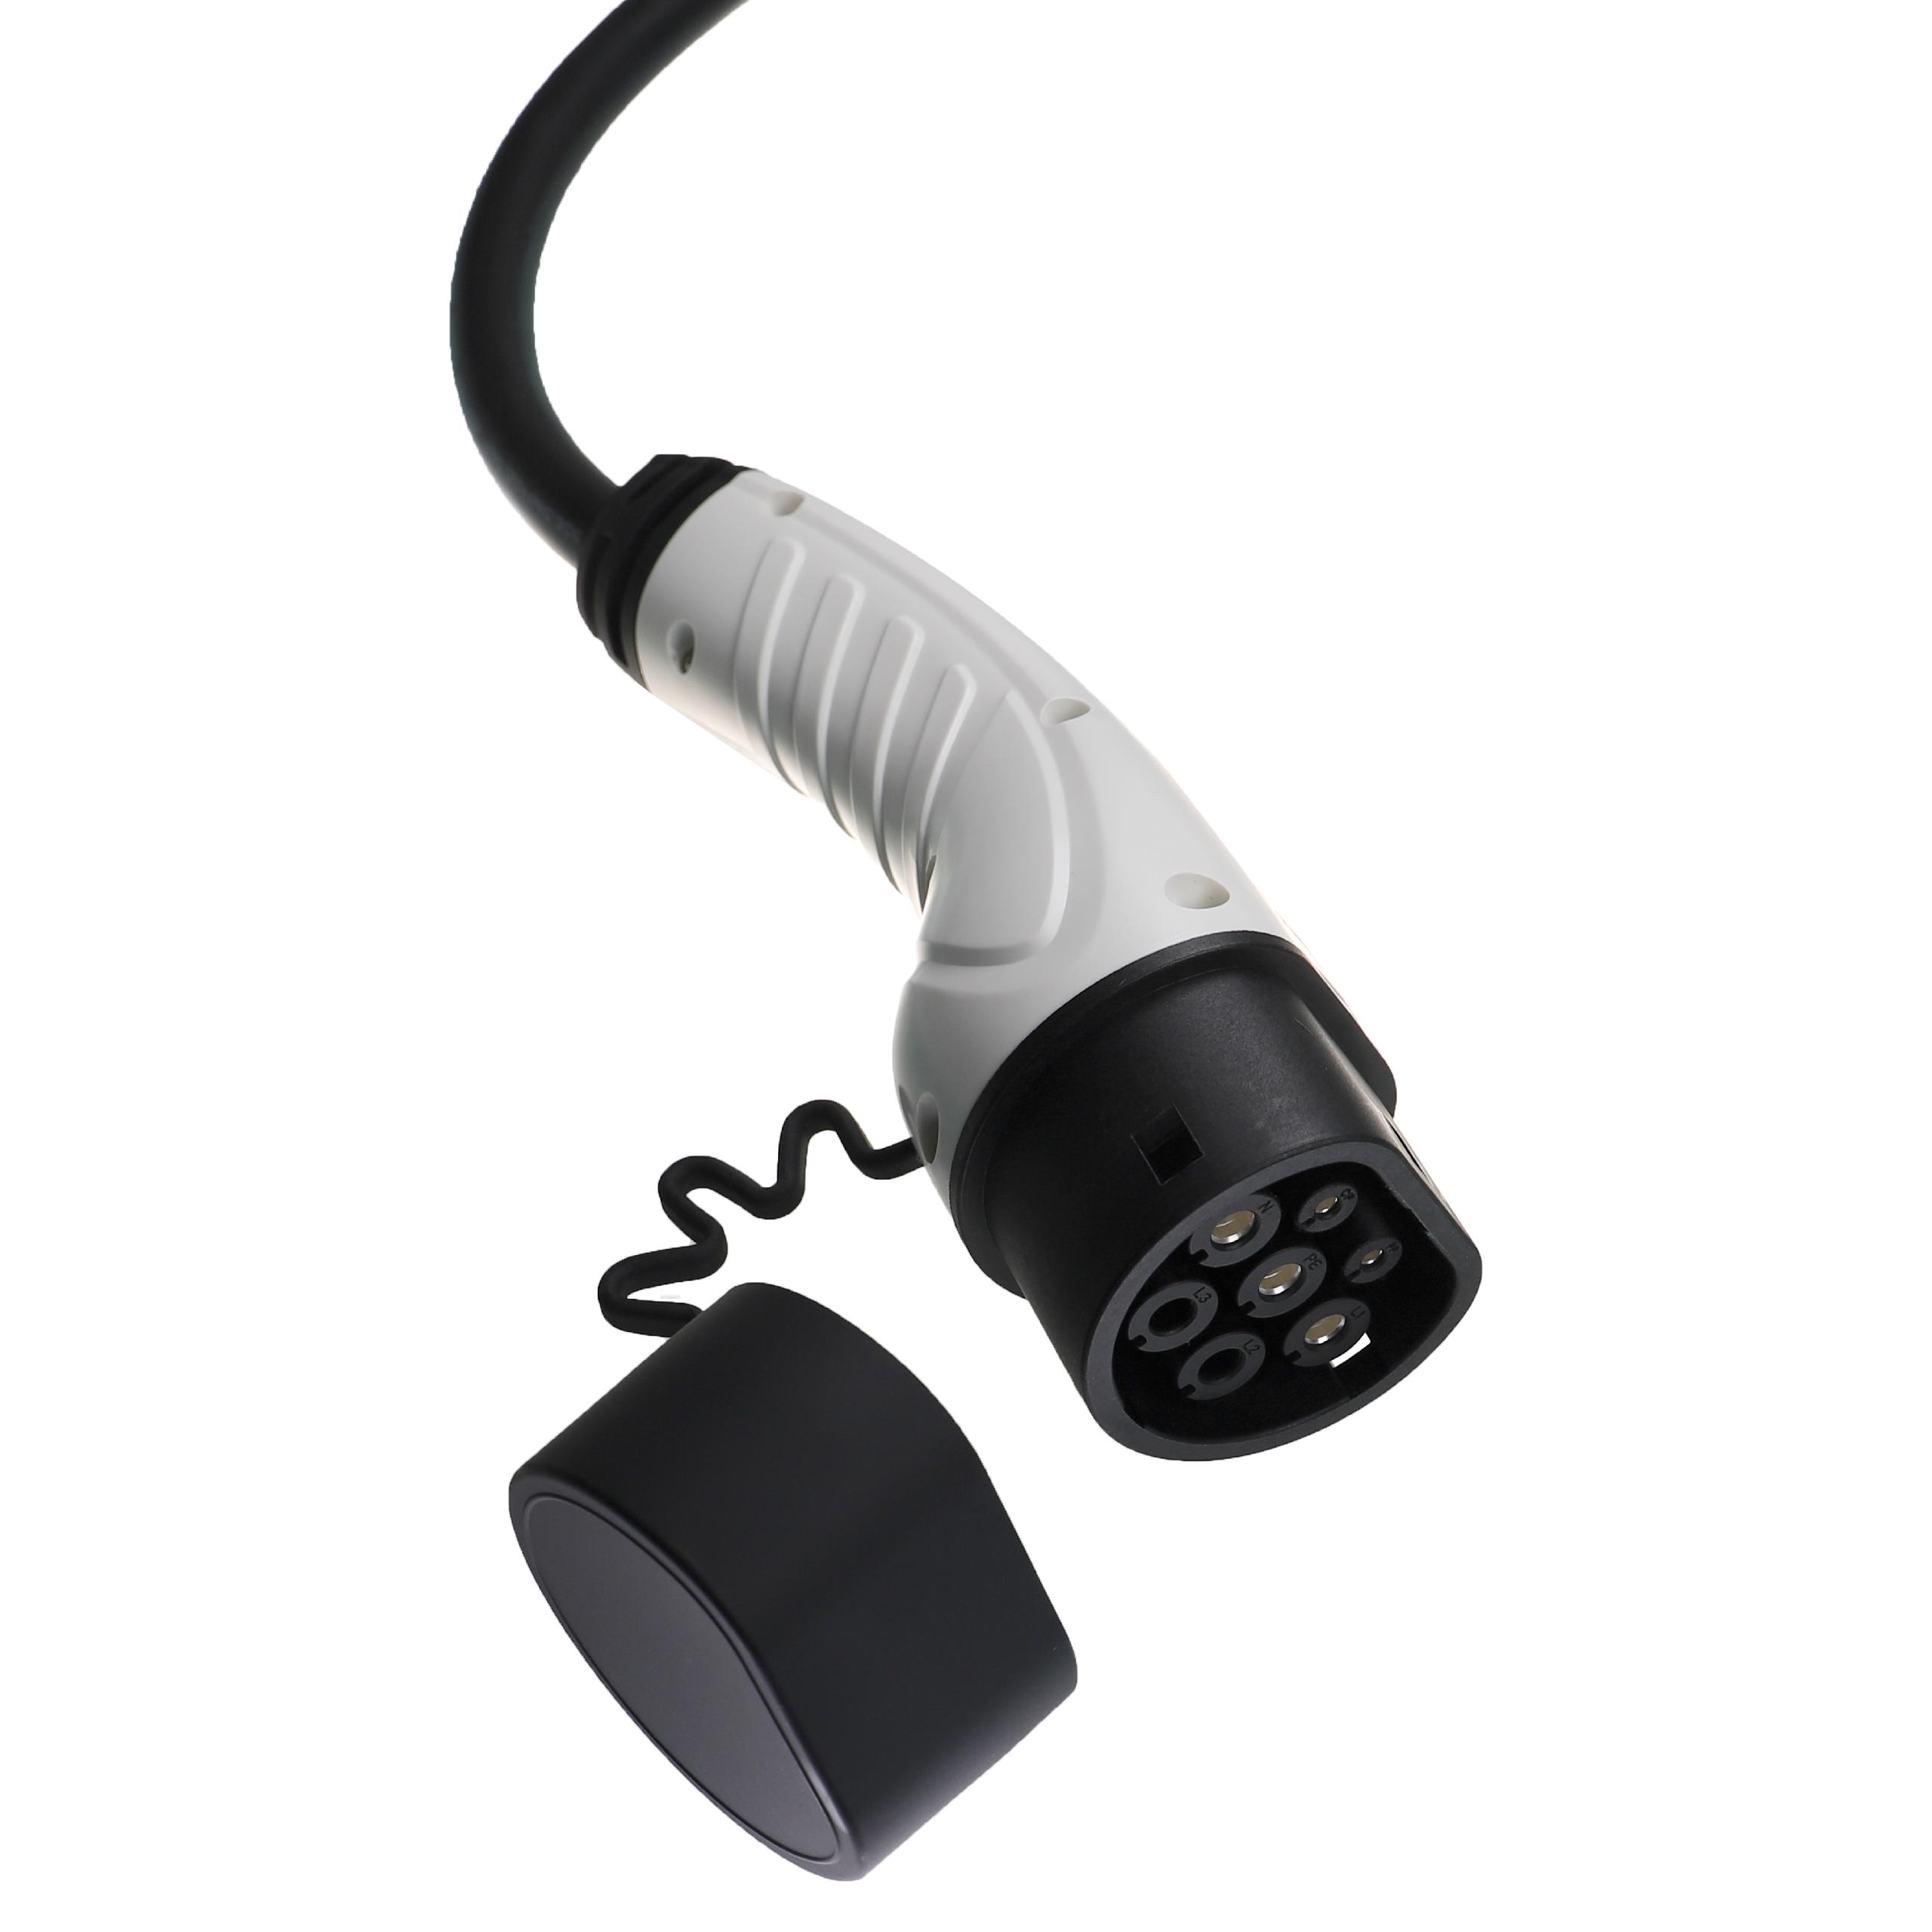 Charging cable 5m, 7kW for BMW X3 xDrive 30e, X5 xDrive 45e